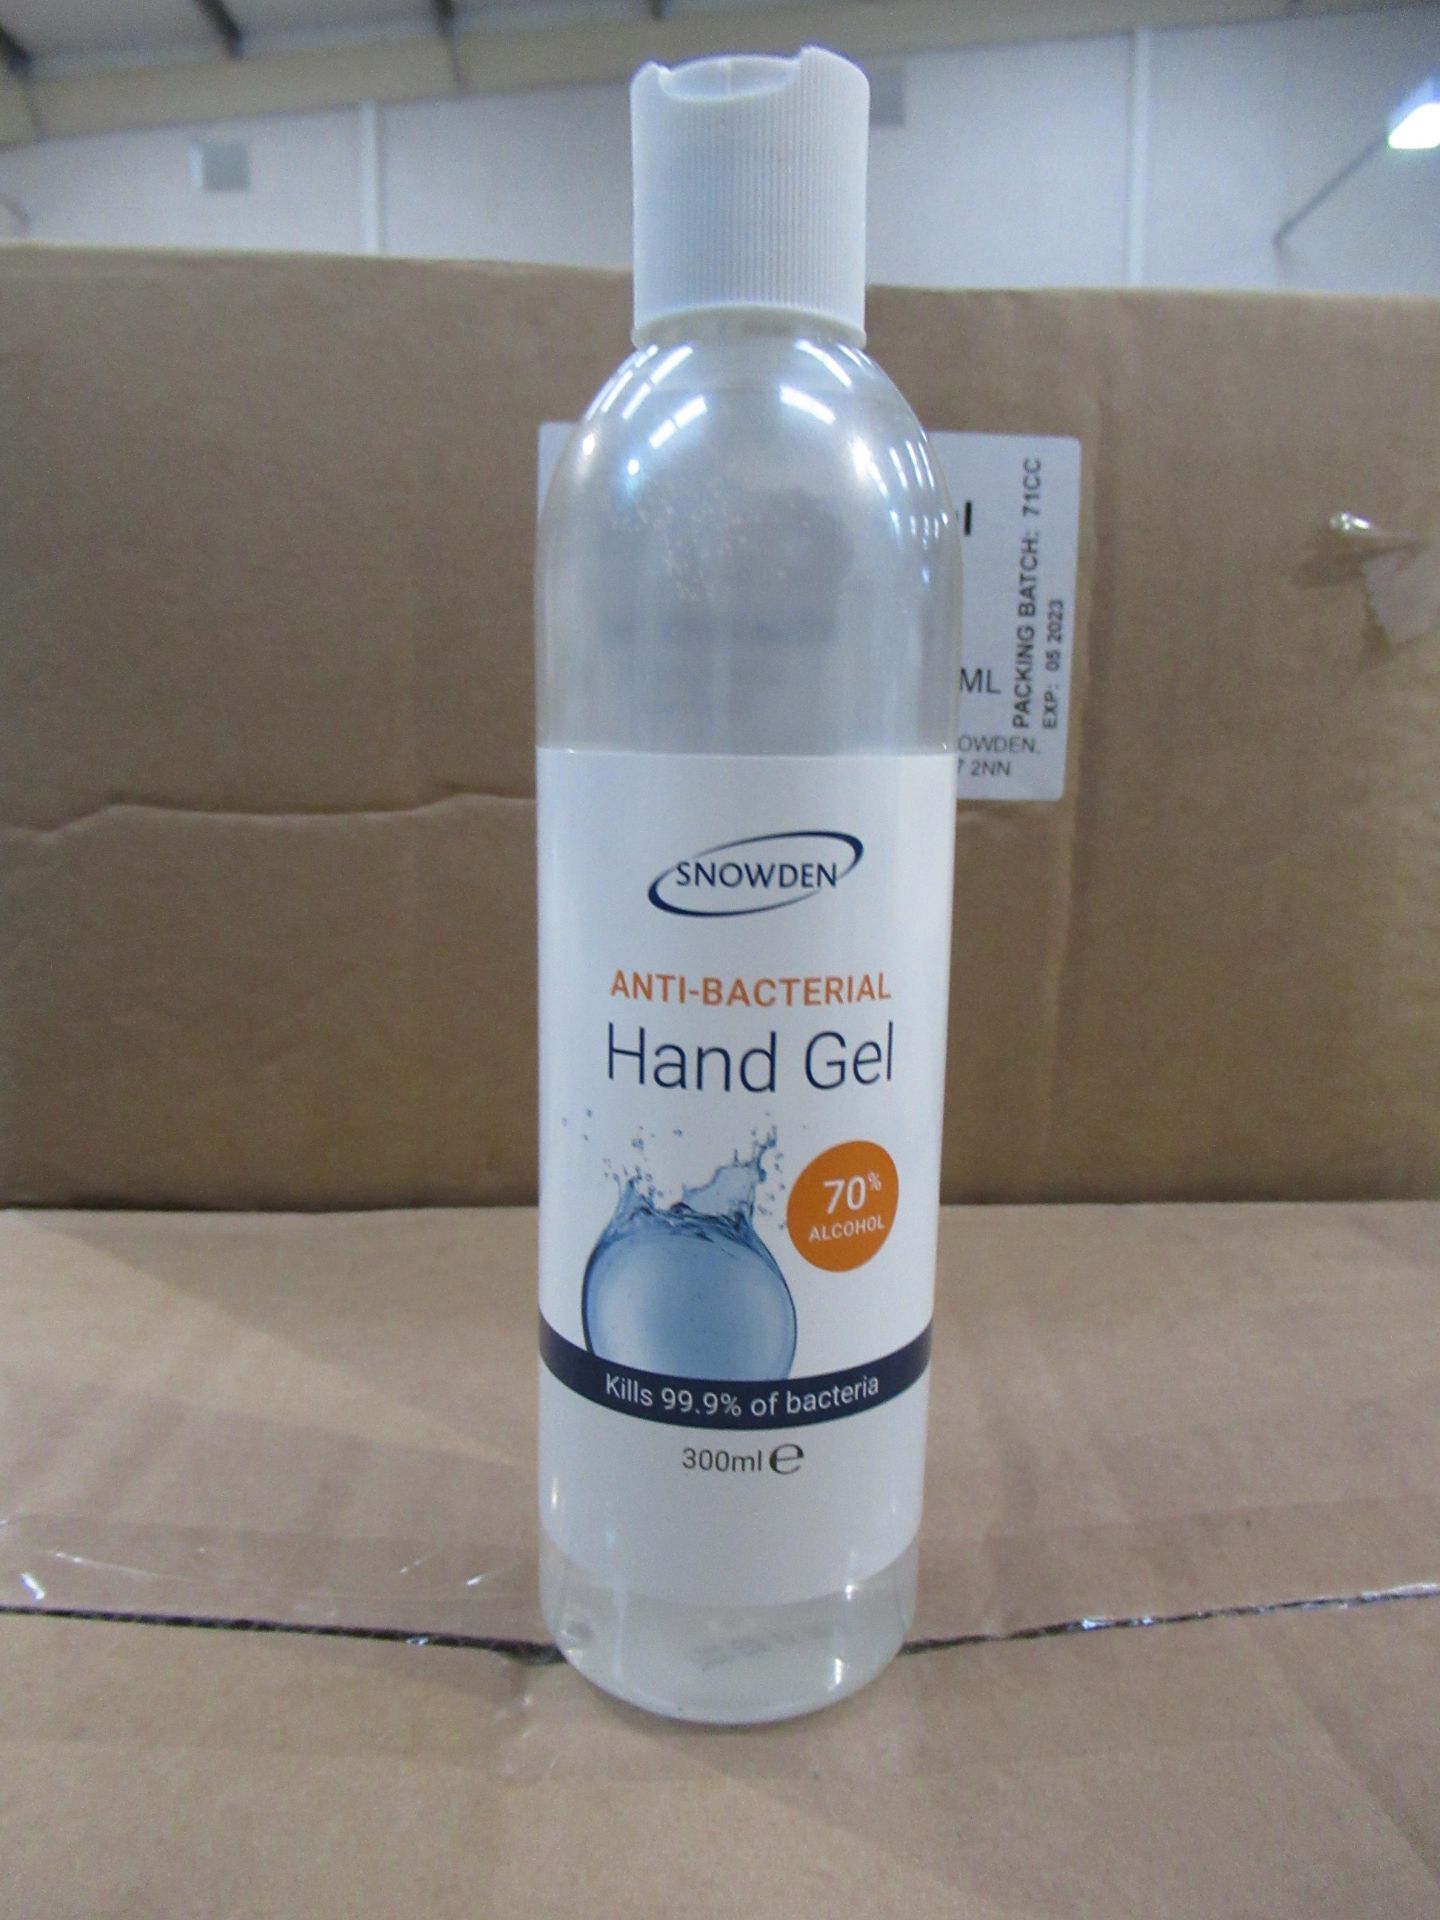 Approx 448x Snowden 300ml anti-bacterial hand gel & approx. 738 (123 x 6) 100ml Inovia hand cleanser - Image 3 of 5